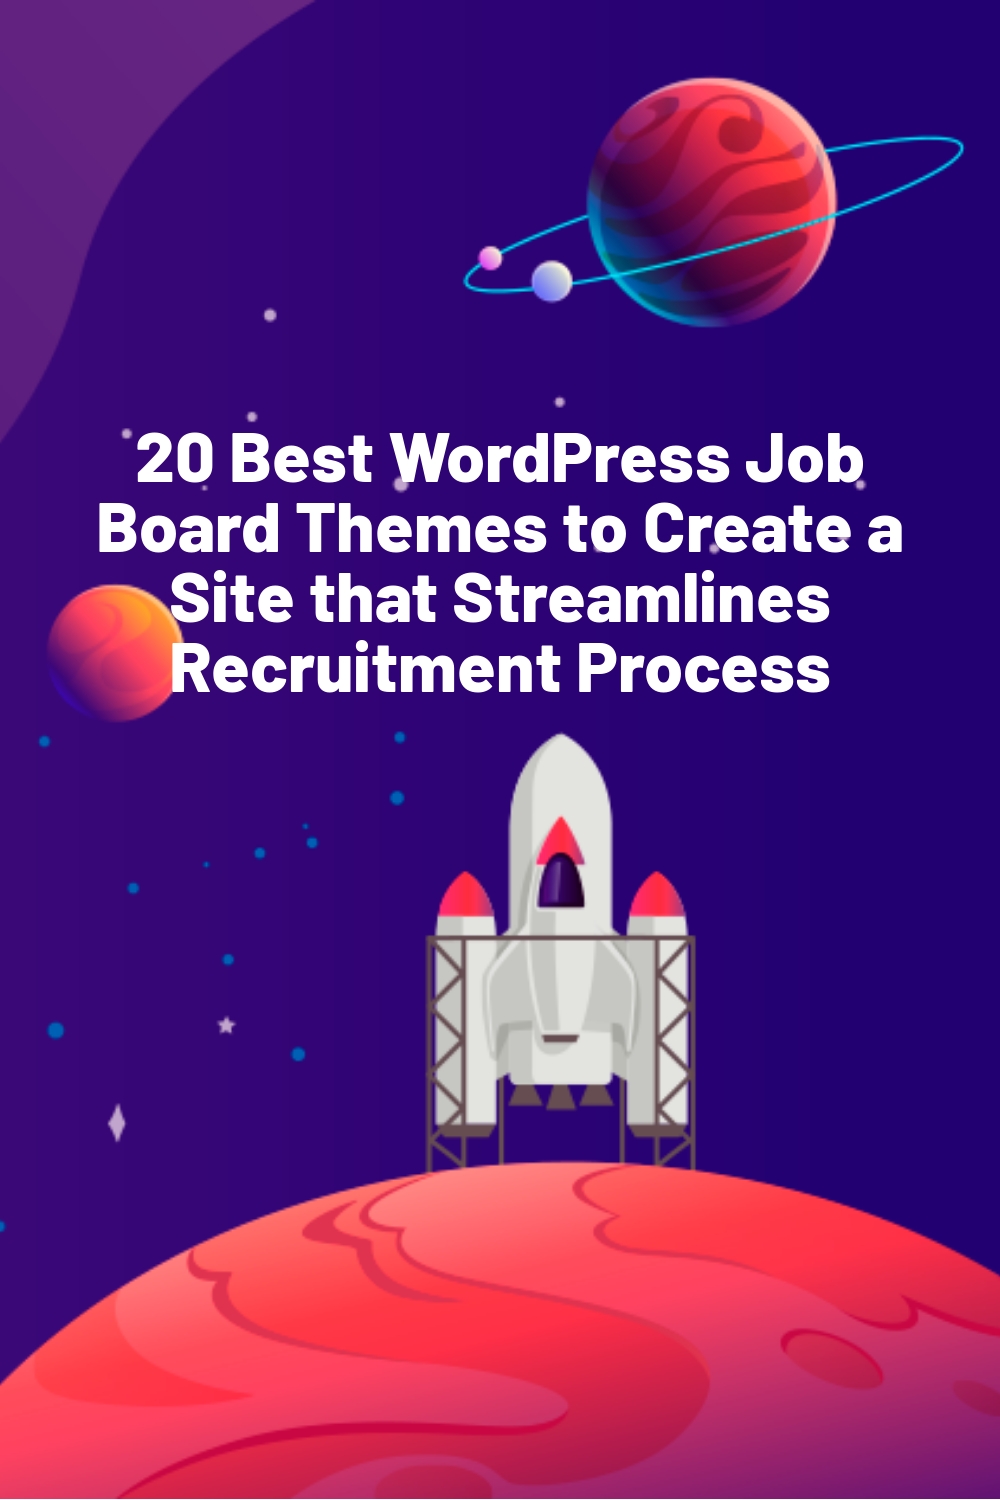 20 Best WordPress Job Board Themes to Create a Site that Streamlines Recruitment Process